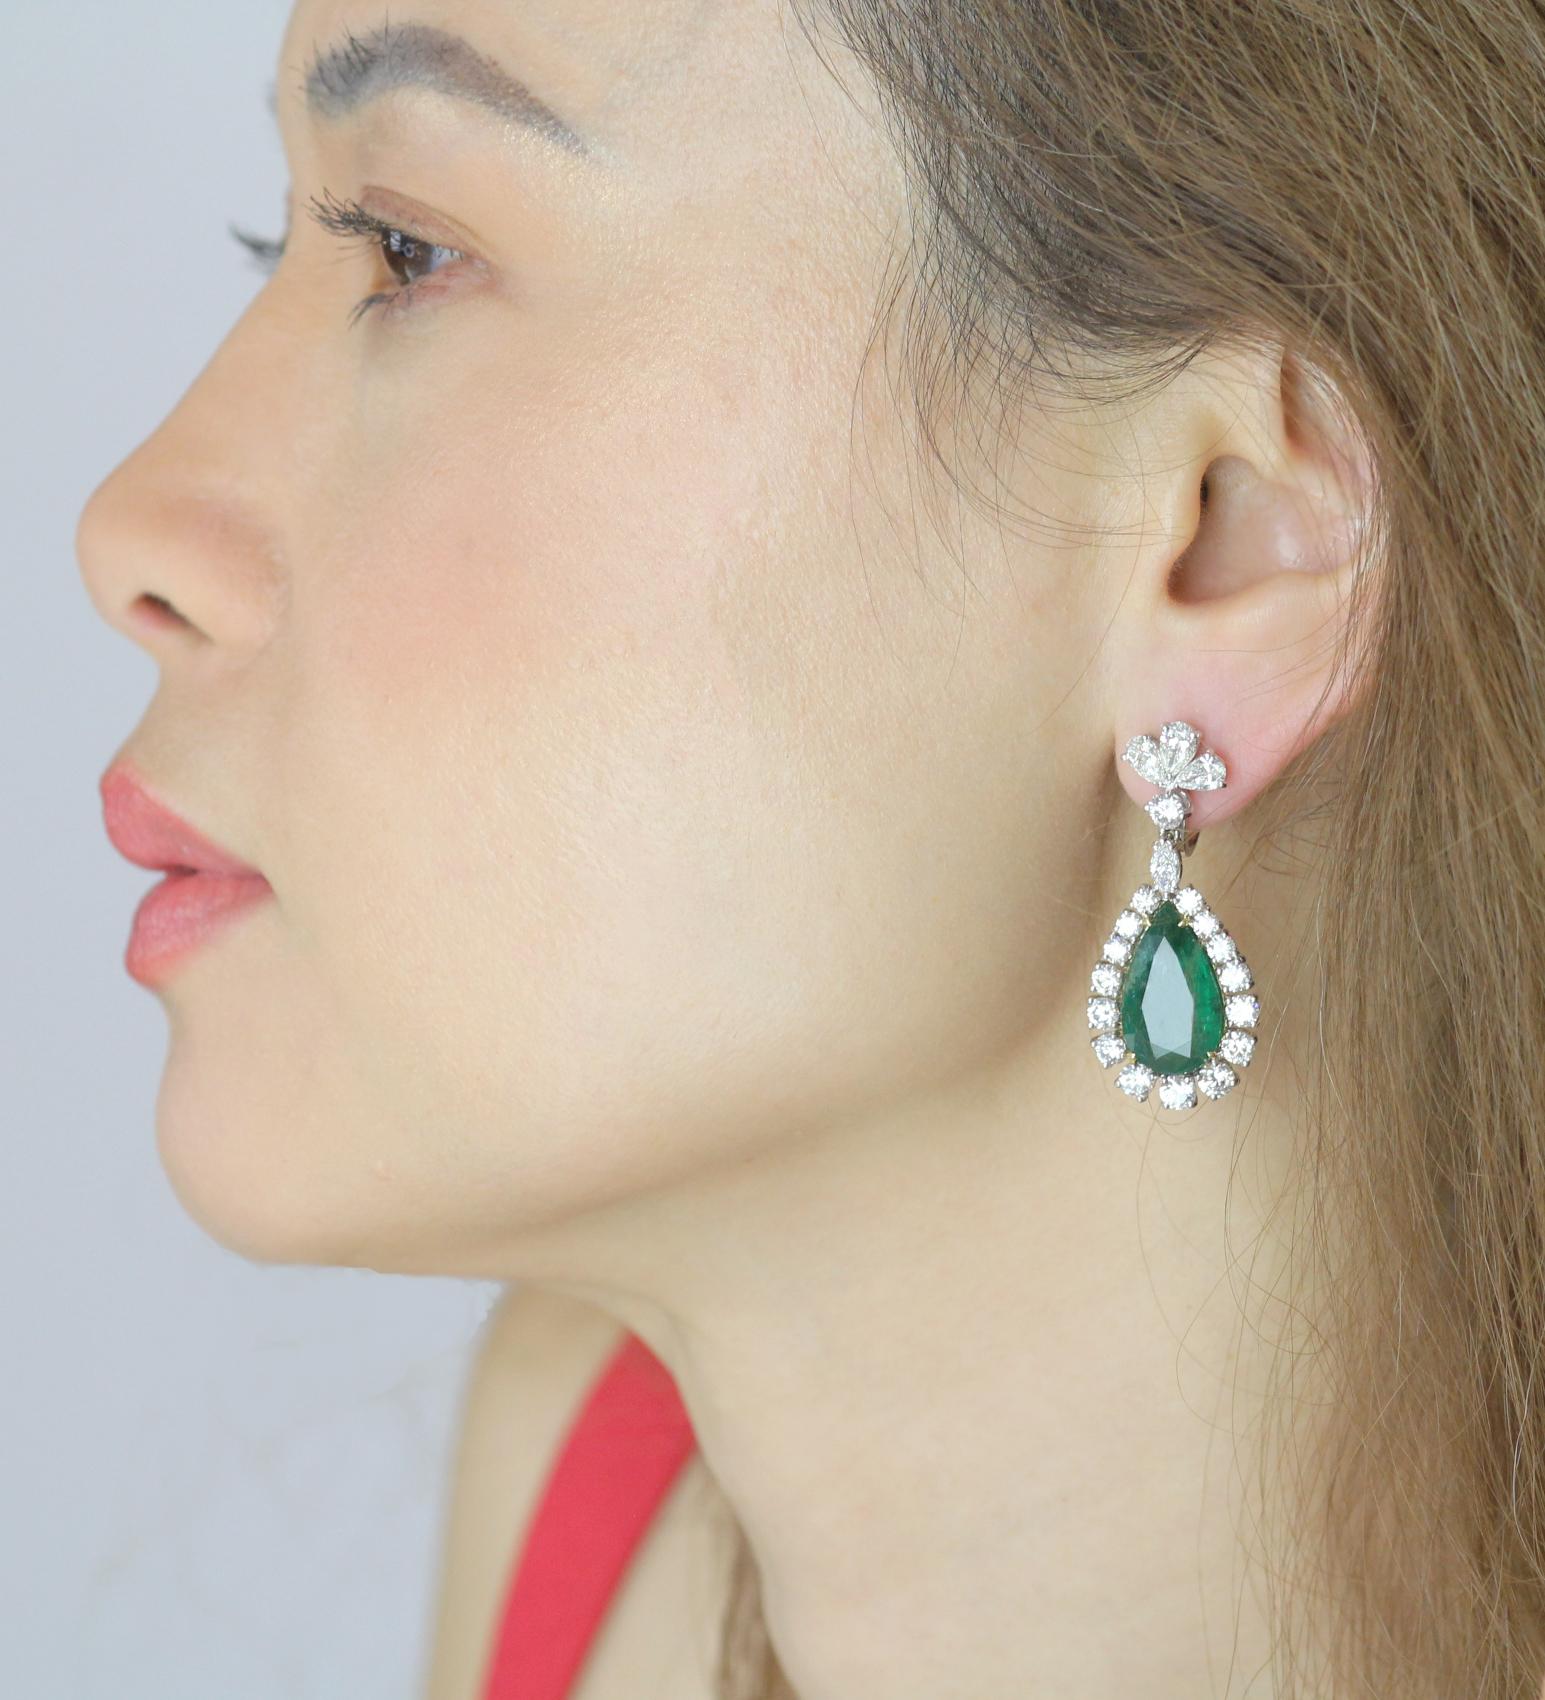 Featuring a perfectly matched pair of natural Zambian pear cut emeralds weighing a total of approximately 17.50cts, certified by the GCS gemmological laboratory.

These vibrant green emeralds have a wonderful saturation of colour and contrast with